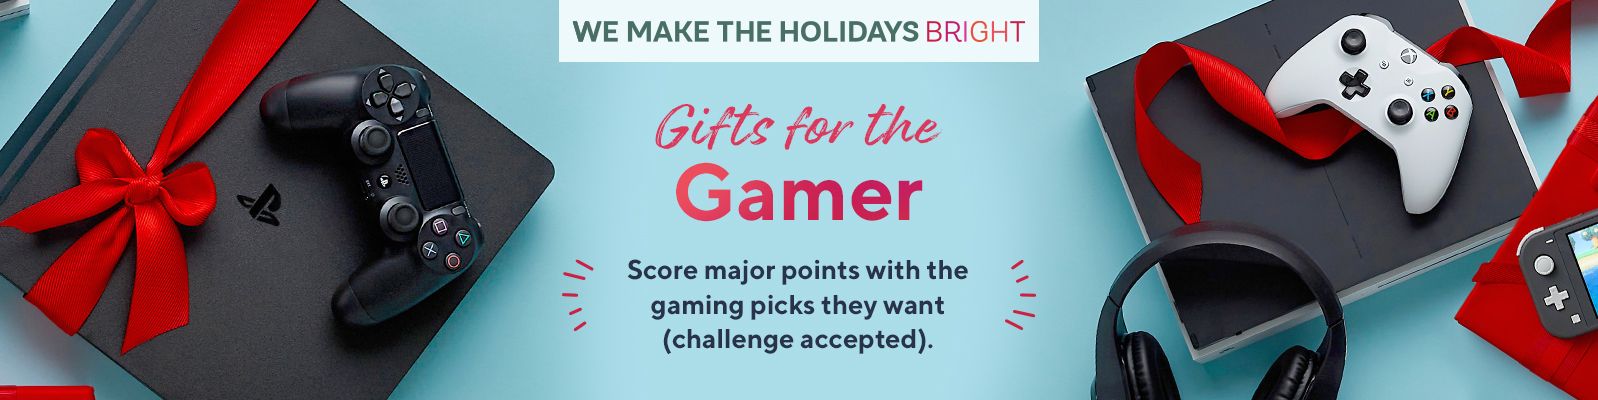 Gifts for the Gamer: We Make the Holidays Bright. Score major points with the gaming picks they want (challenge accepted).